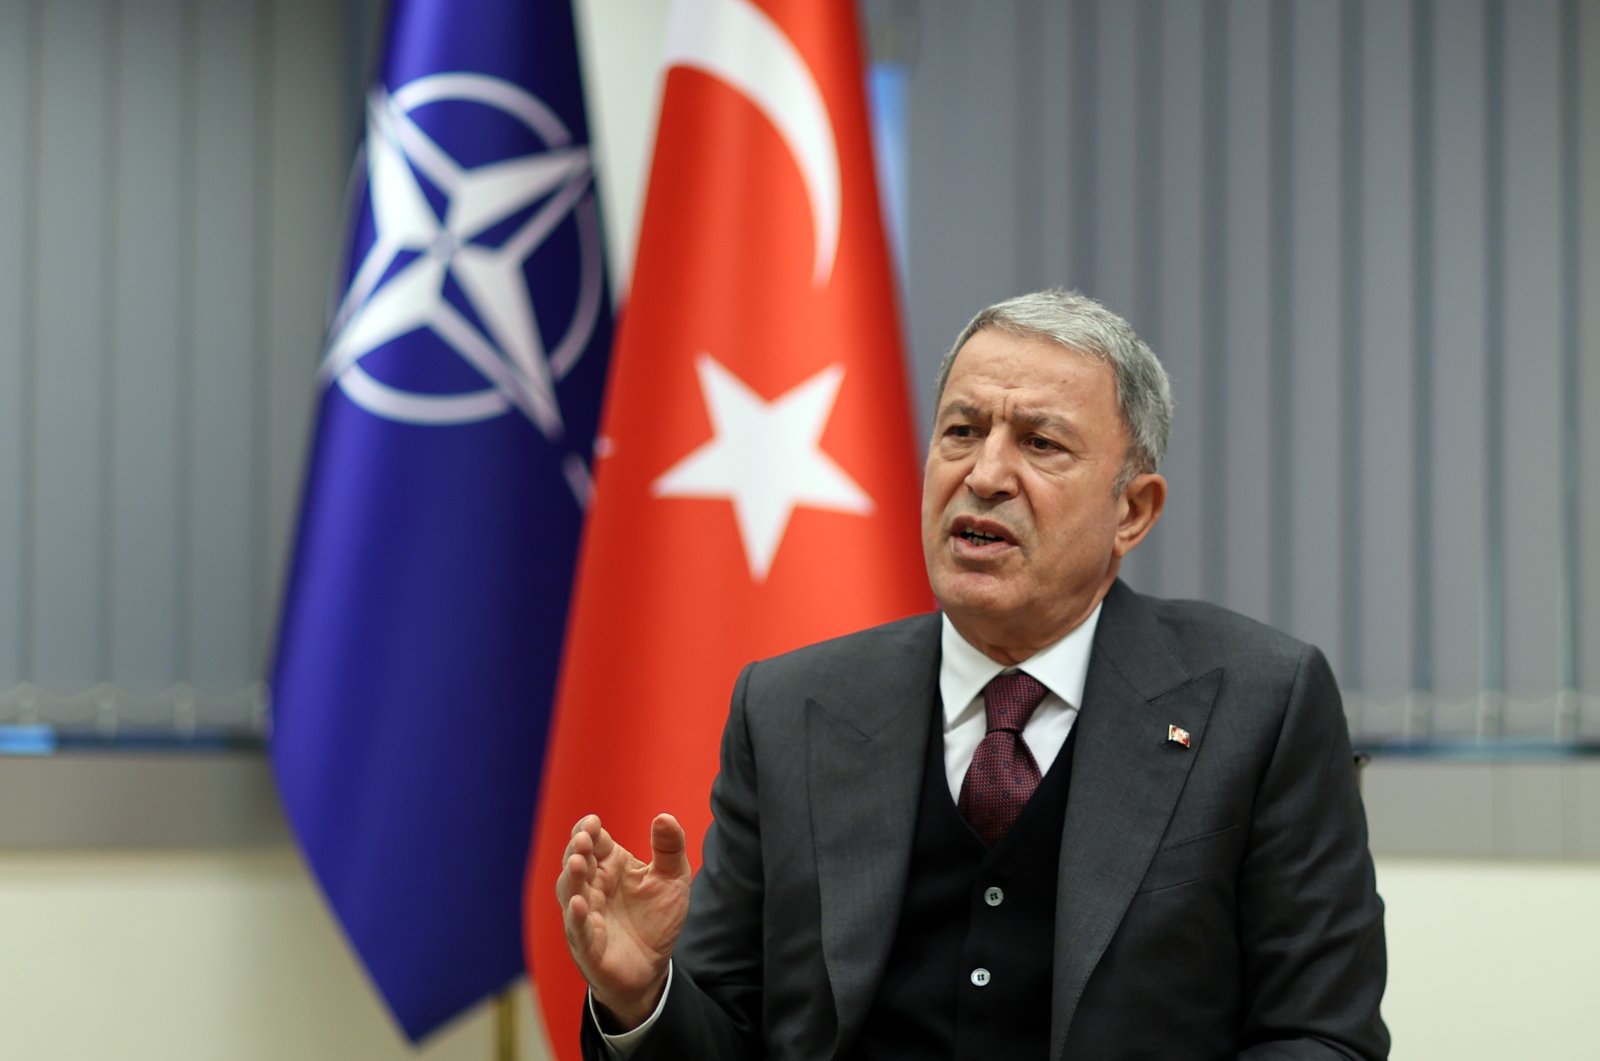 Turkey's Defense Minister Hulusi Akar speaking to journalists after a NATO meeting in Brussels, Belgium Oct. 23.2021 (AA Photo)

